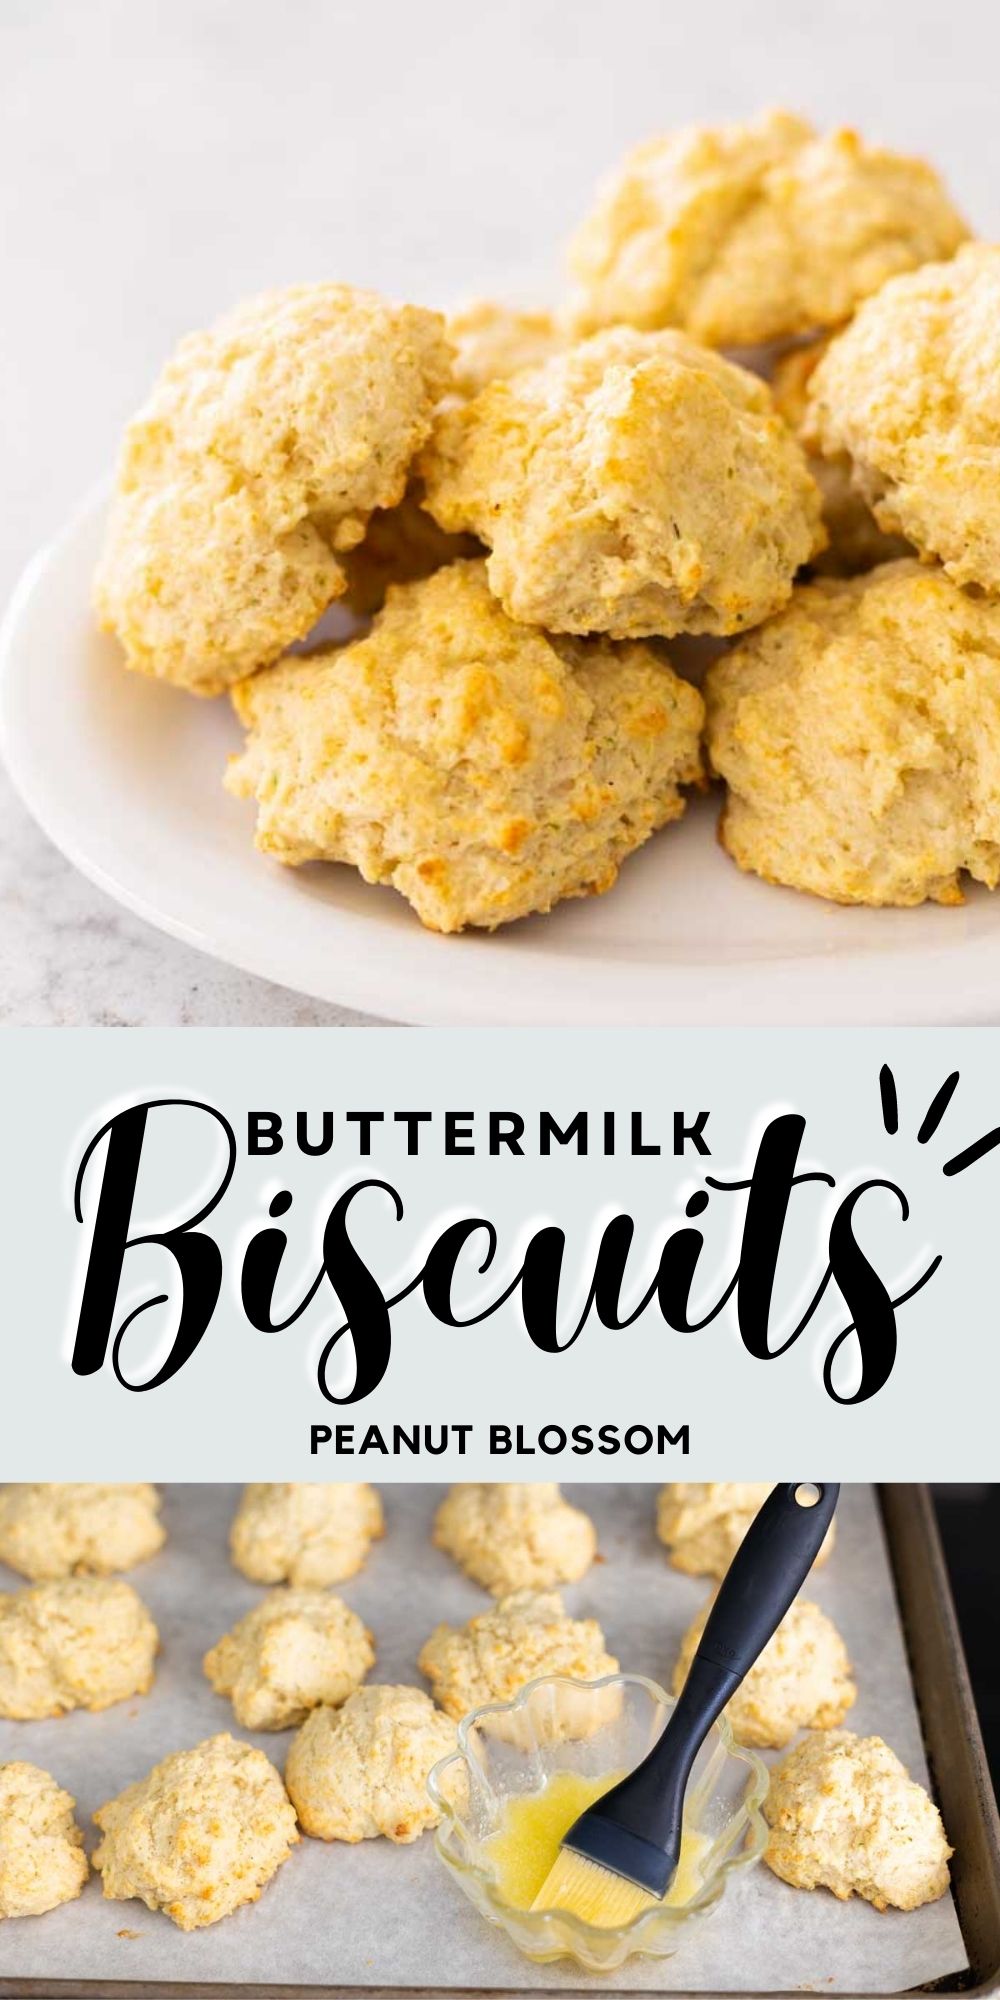 A photo collage shows the finished biscuits next to a baking pan with a pastry brush next to a cup of butter.